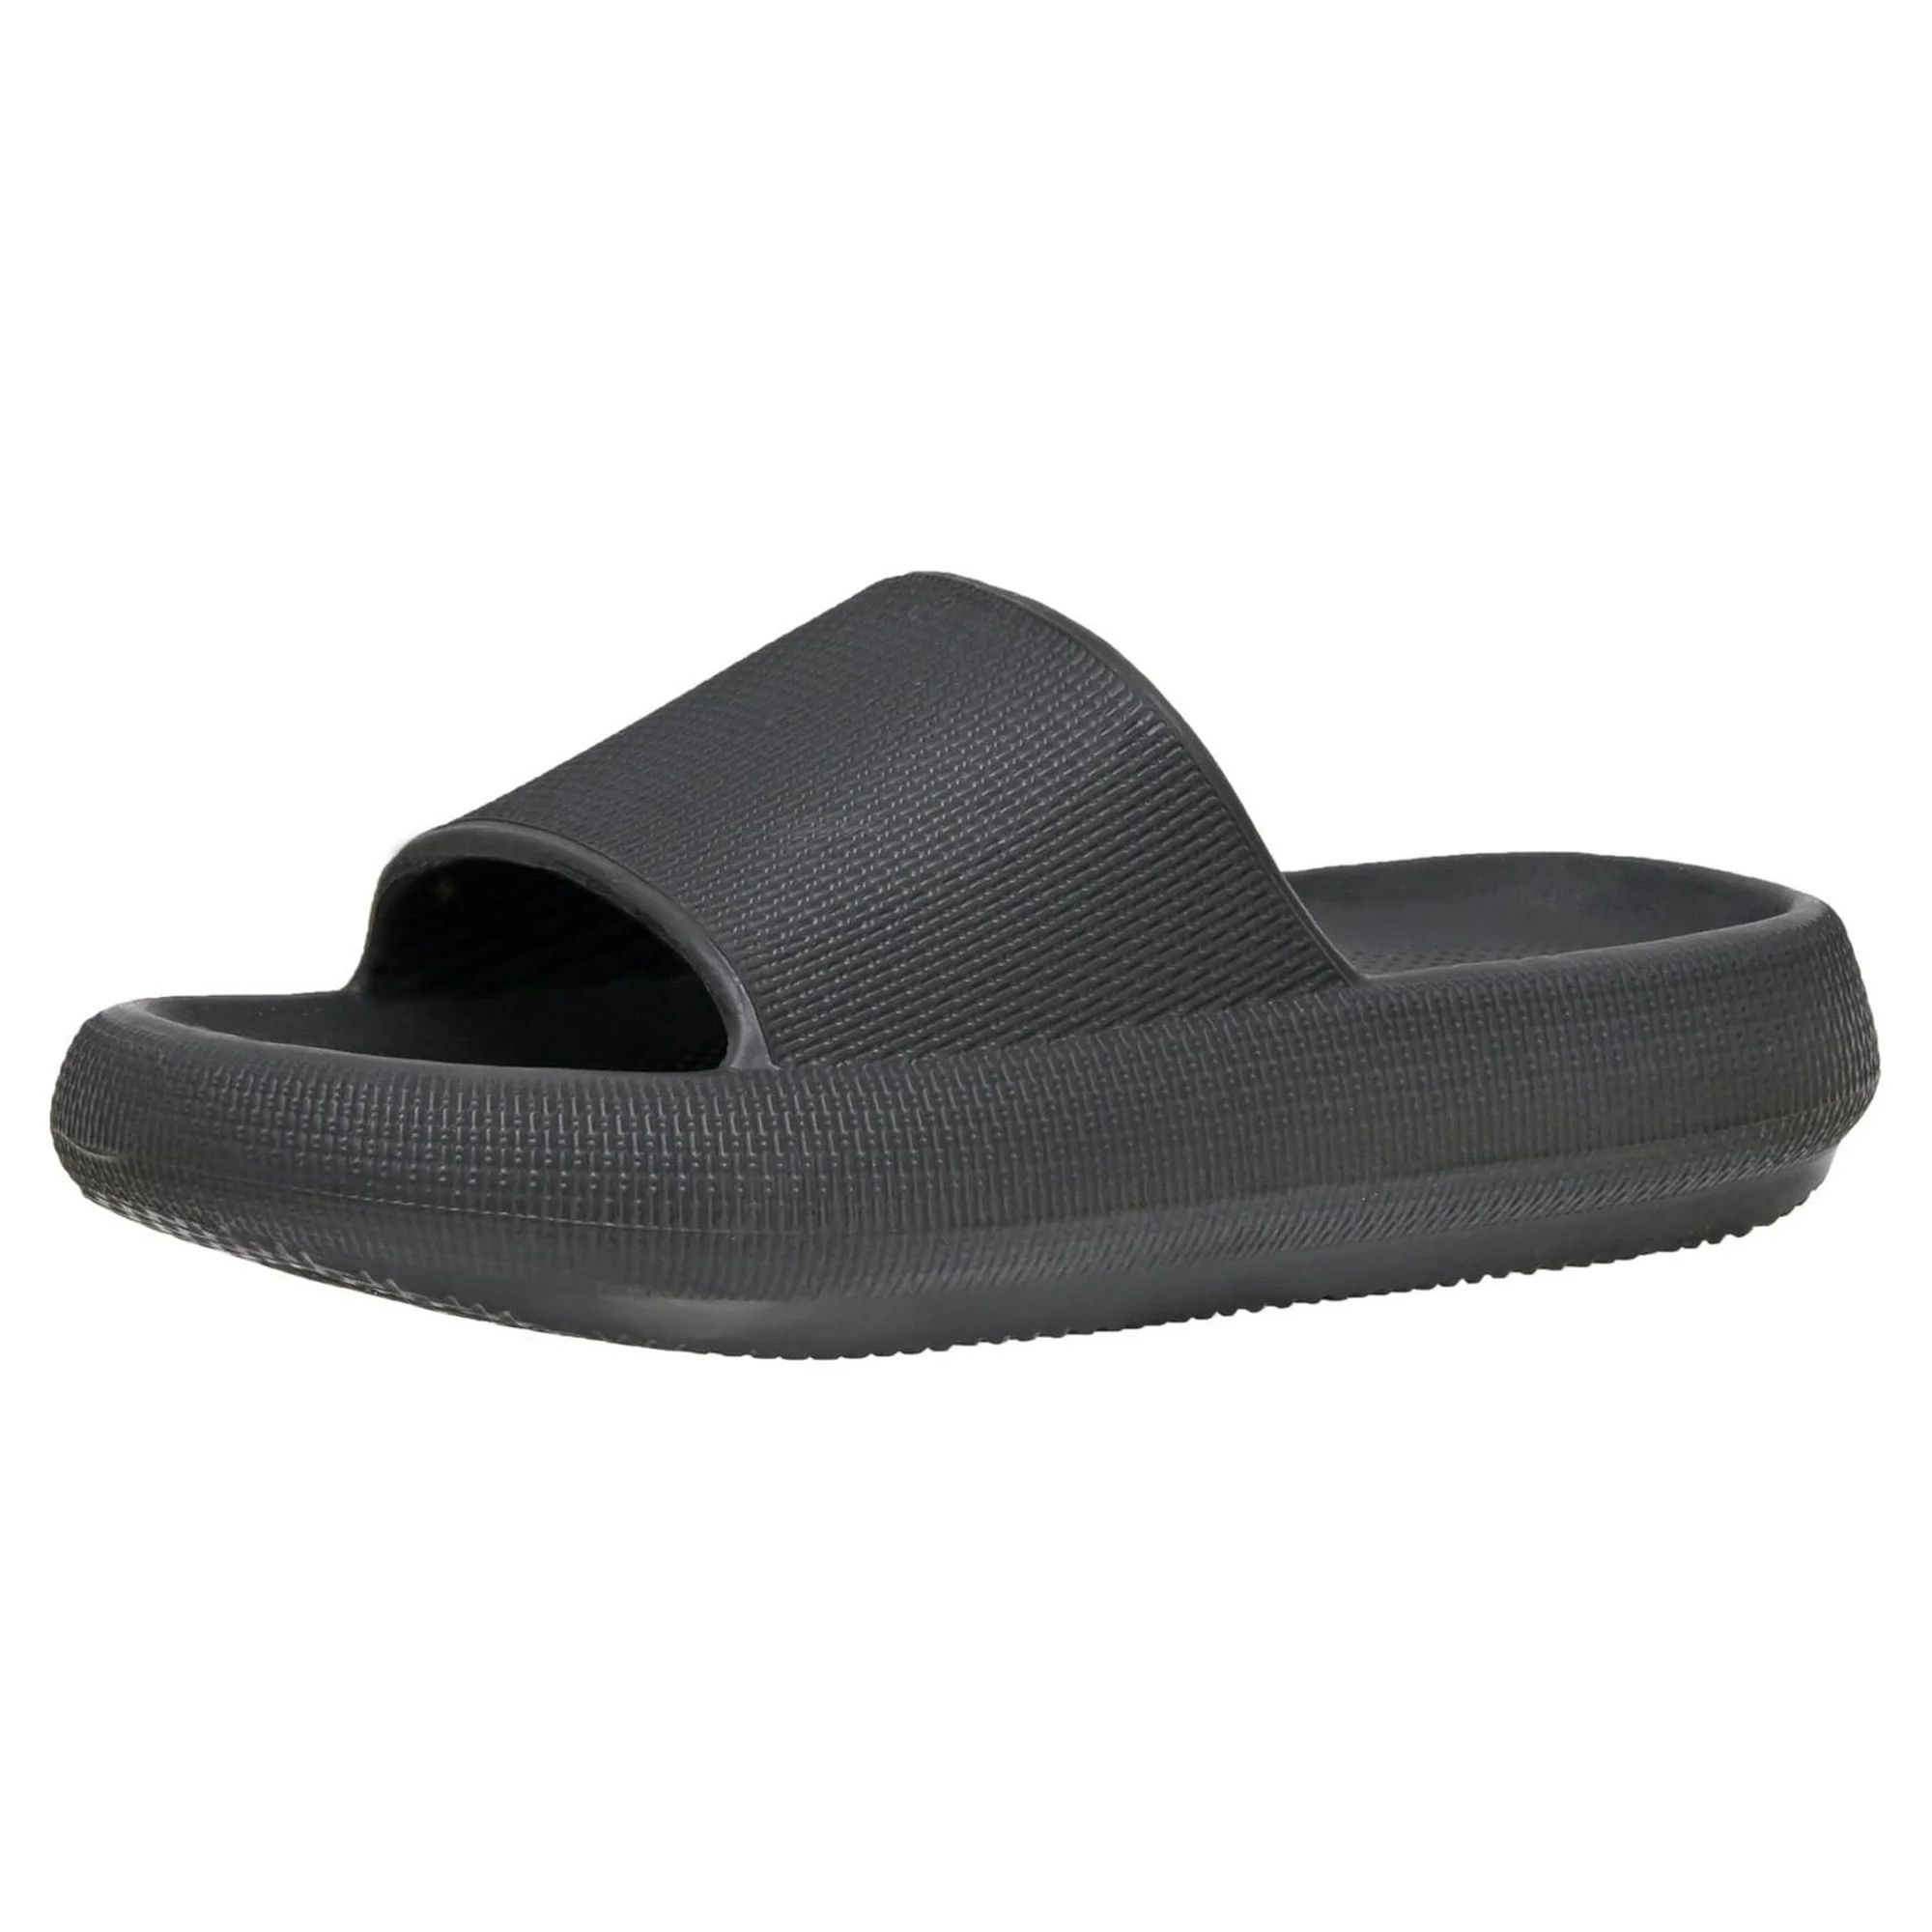 Cushionaire Women's Feather Recovery Slide Sandal with +Comfort | Walmart (US)